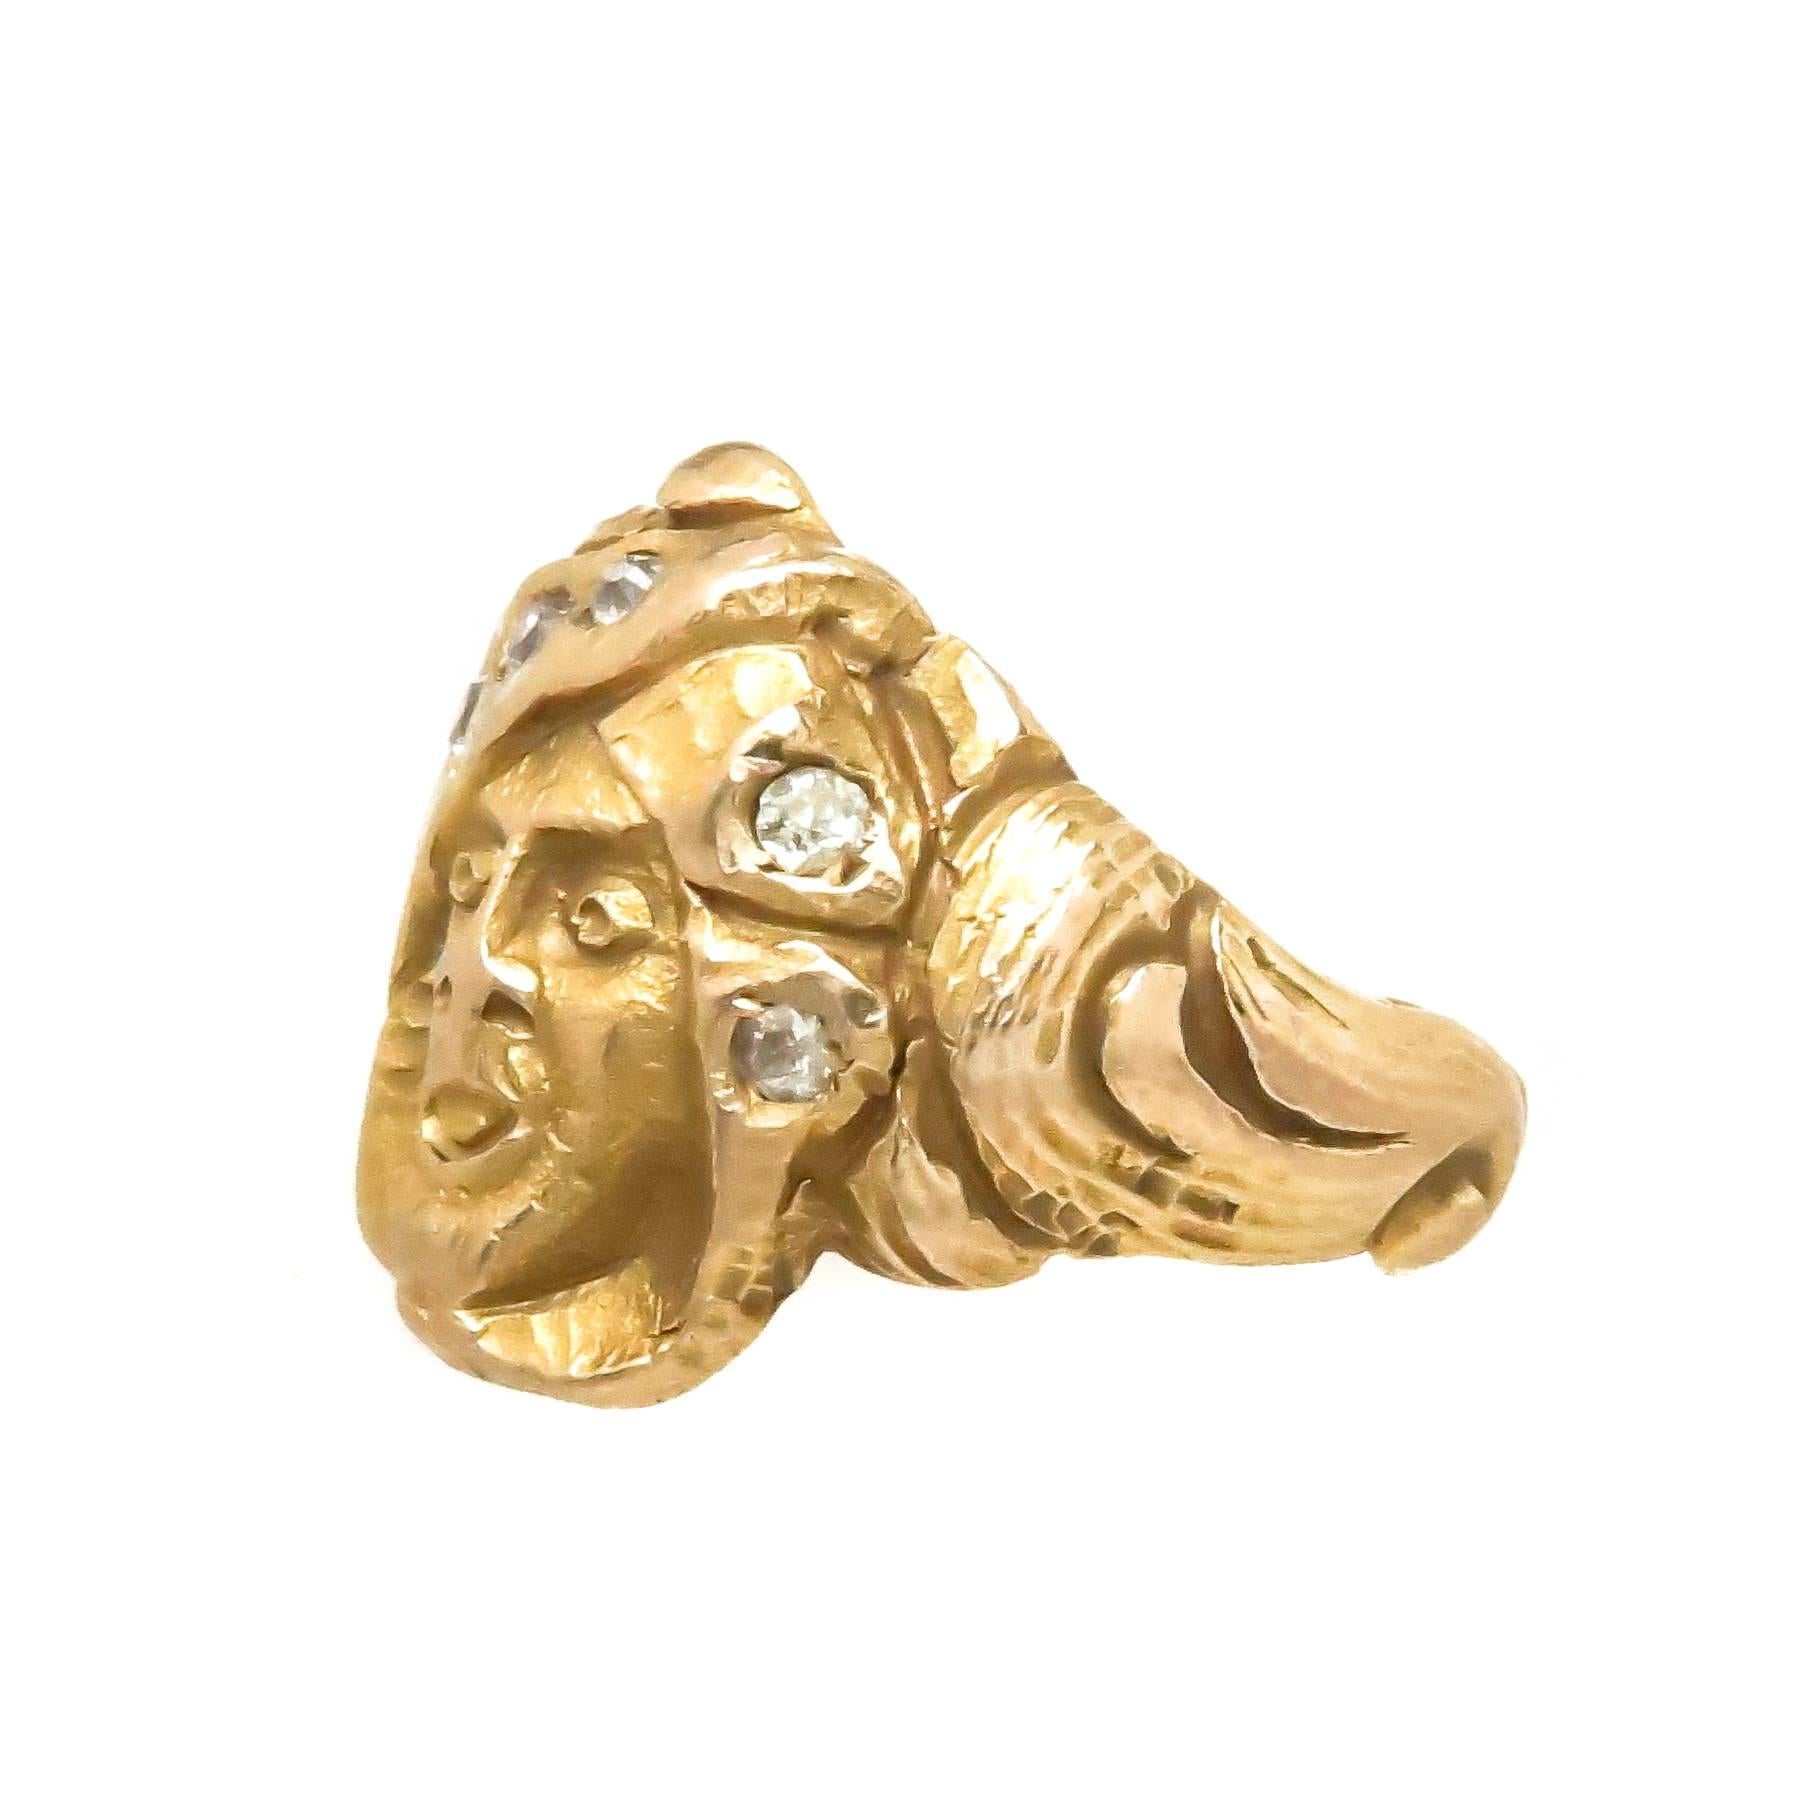 Circa 1910 Art Nouveau 14K Yellow Gold Face Ring, appearing to be a Man in a headdress that is set with old cut Diamonds.  The top of the ring measures 3/4 X 3/4 inch, excellent crisp condition with detailed hand chased Gold Workmanship. Finger size